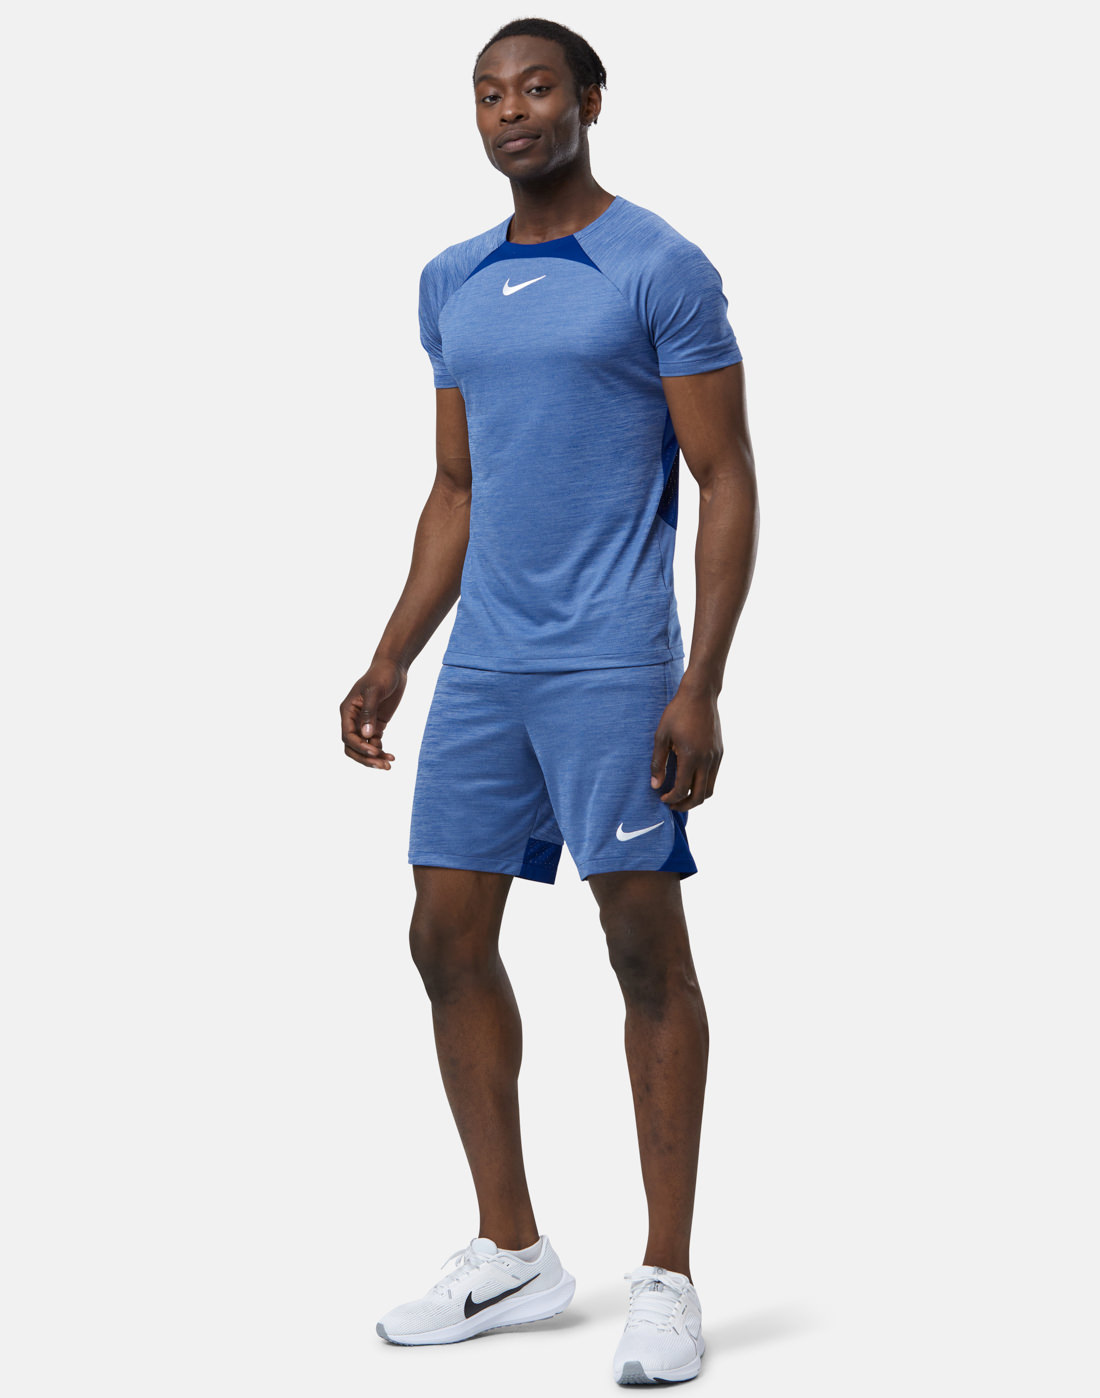 Nike Mens Dri-Fit Academy T-Shirt - Blue | Life Style Sports IE